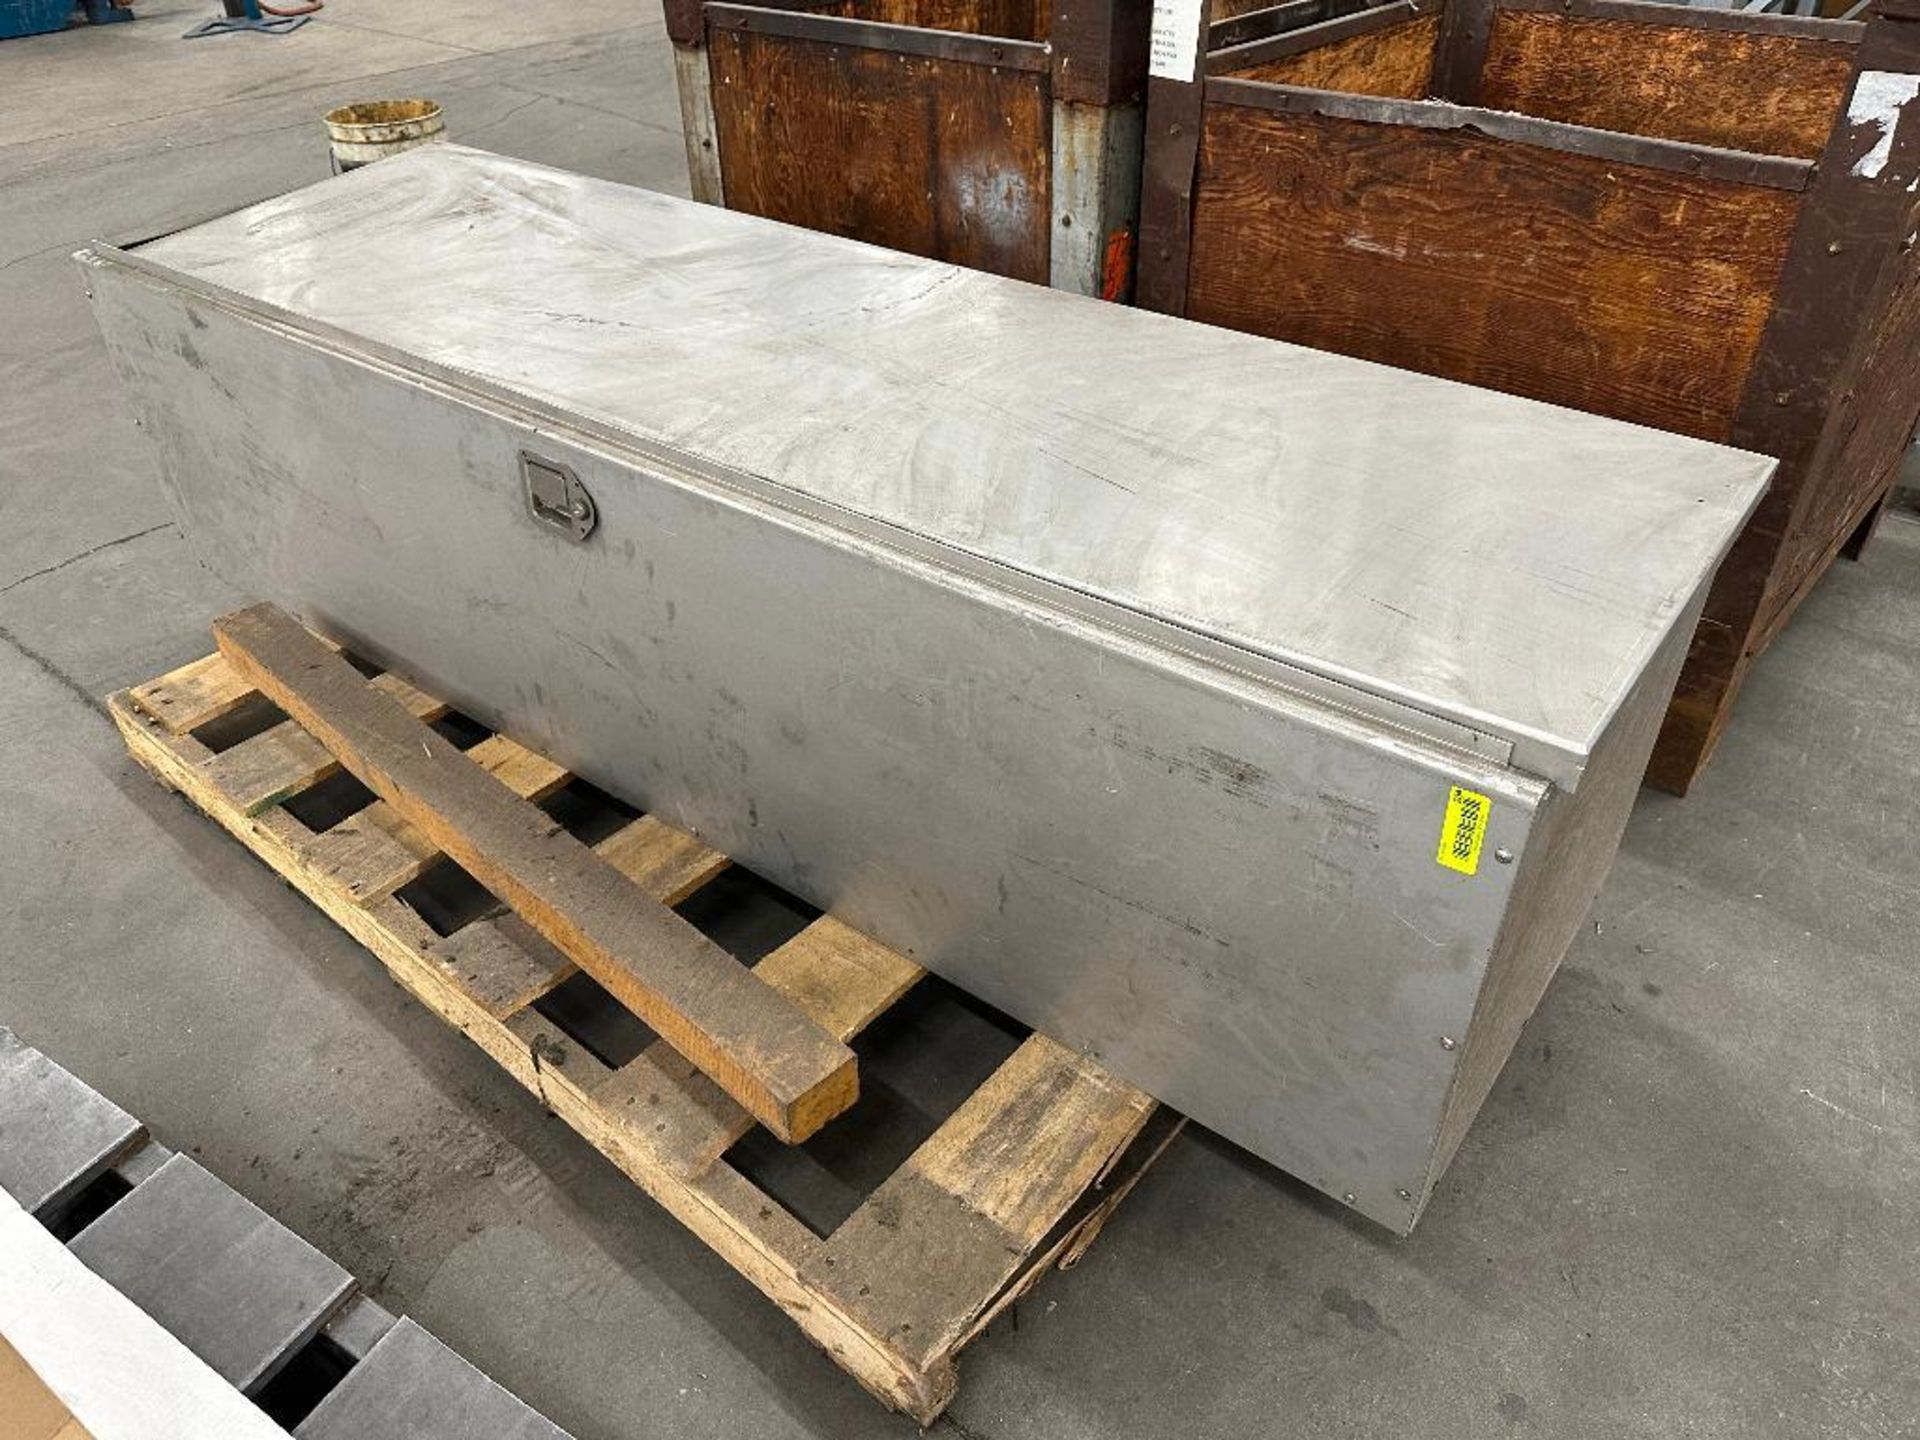 78" X 22" STAINLESS TRUCK BOX WITH LID.